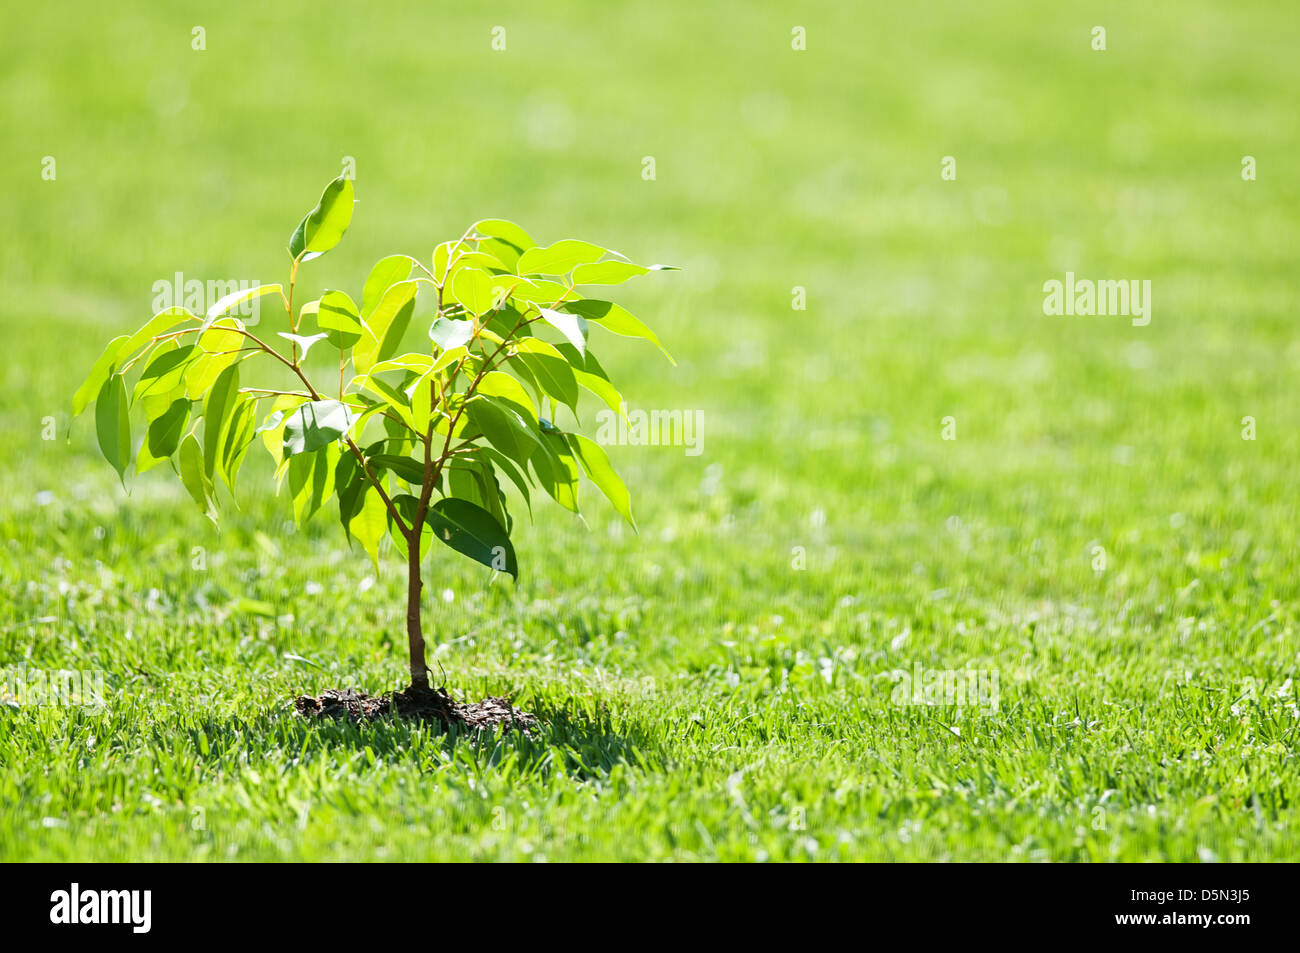 small tree on green lawn Stock Photo